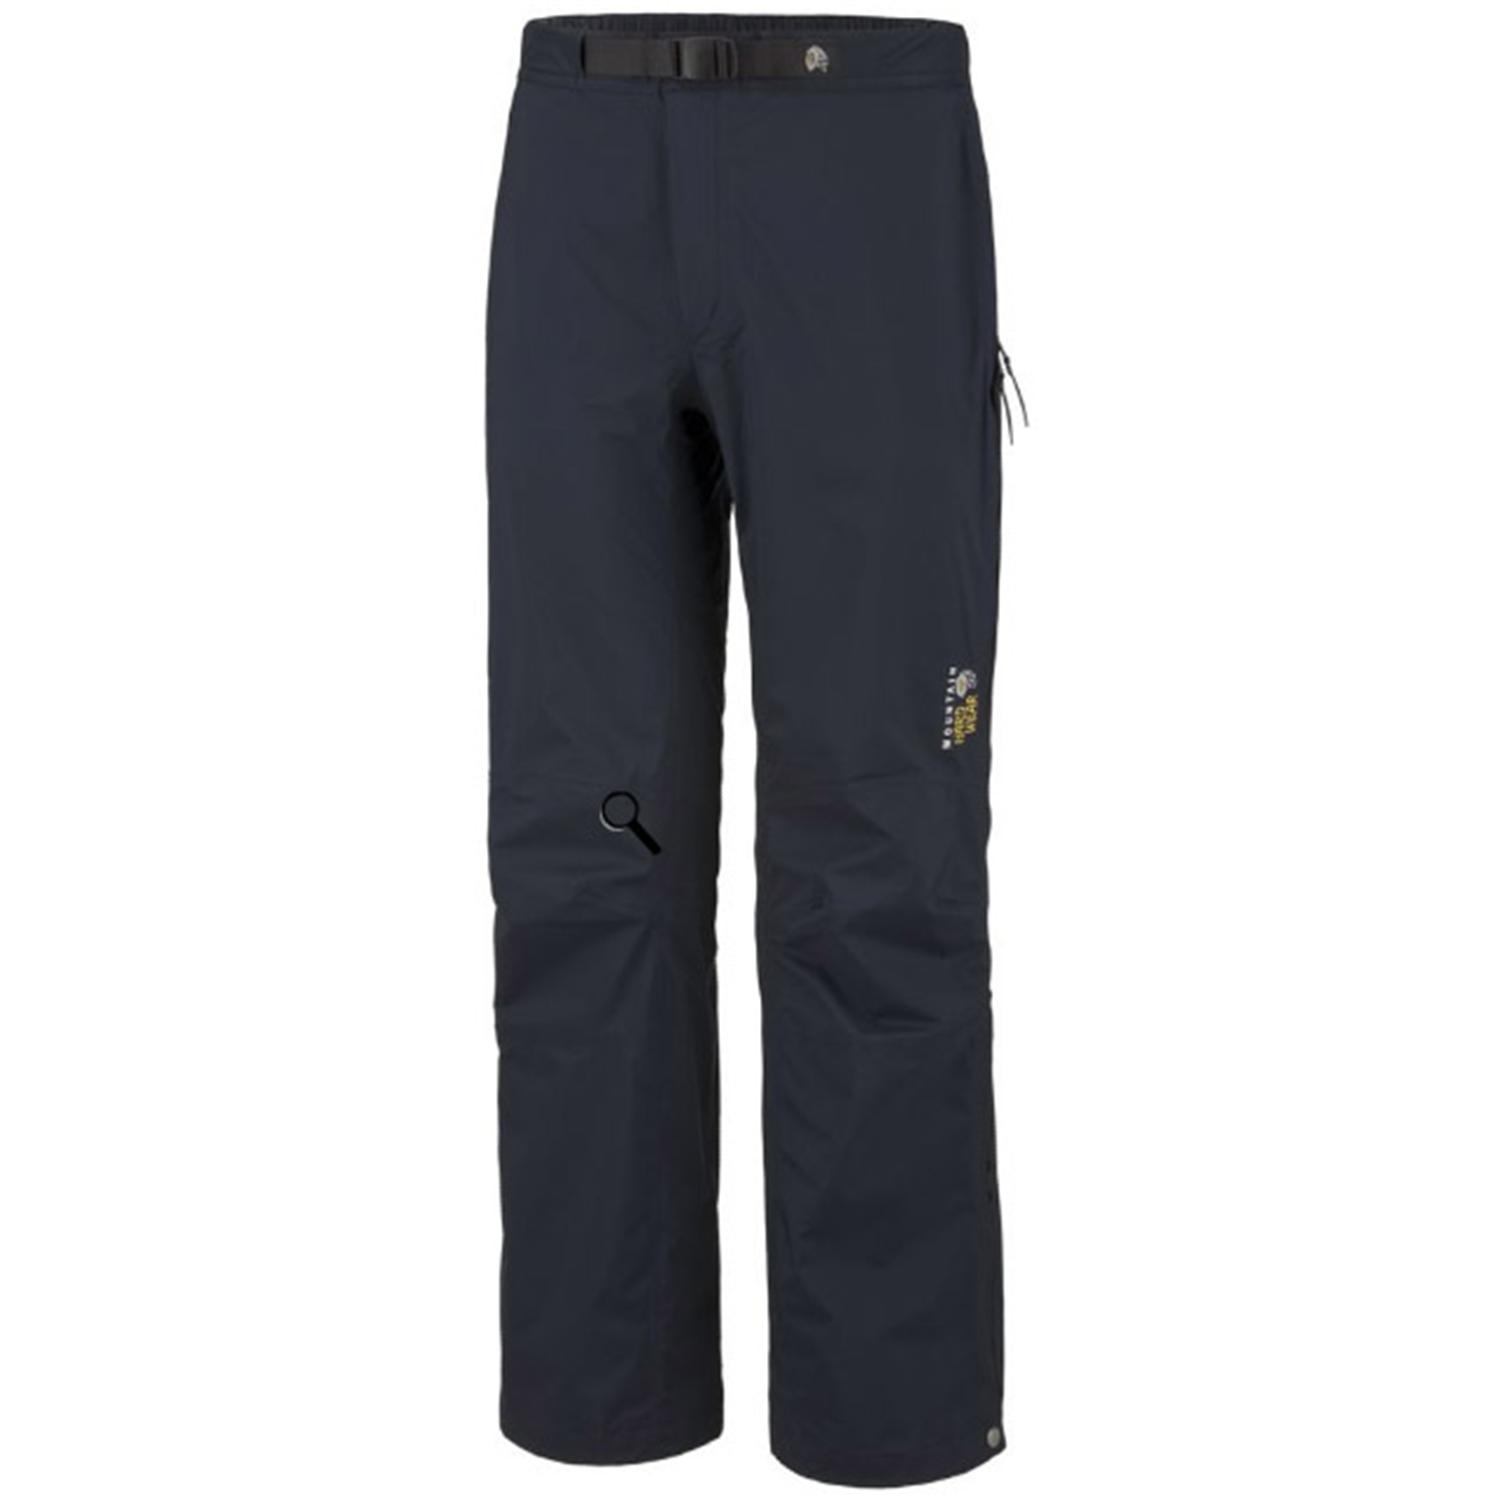 Mountain Hardwear Cohesion Stretch Waterproof Pants | evo outlet